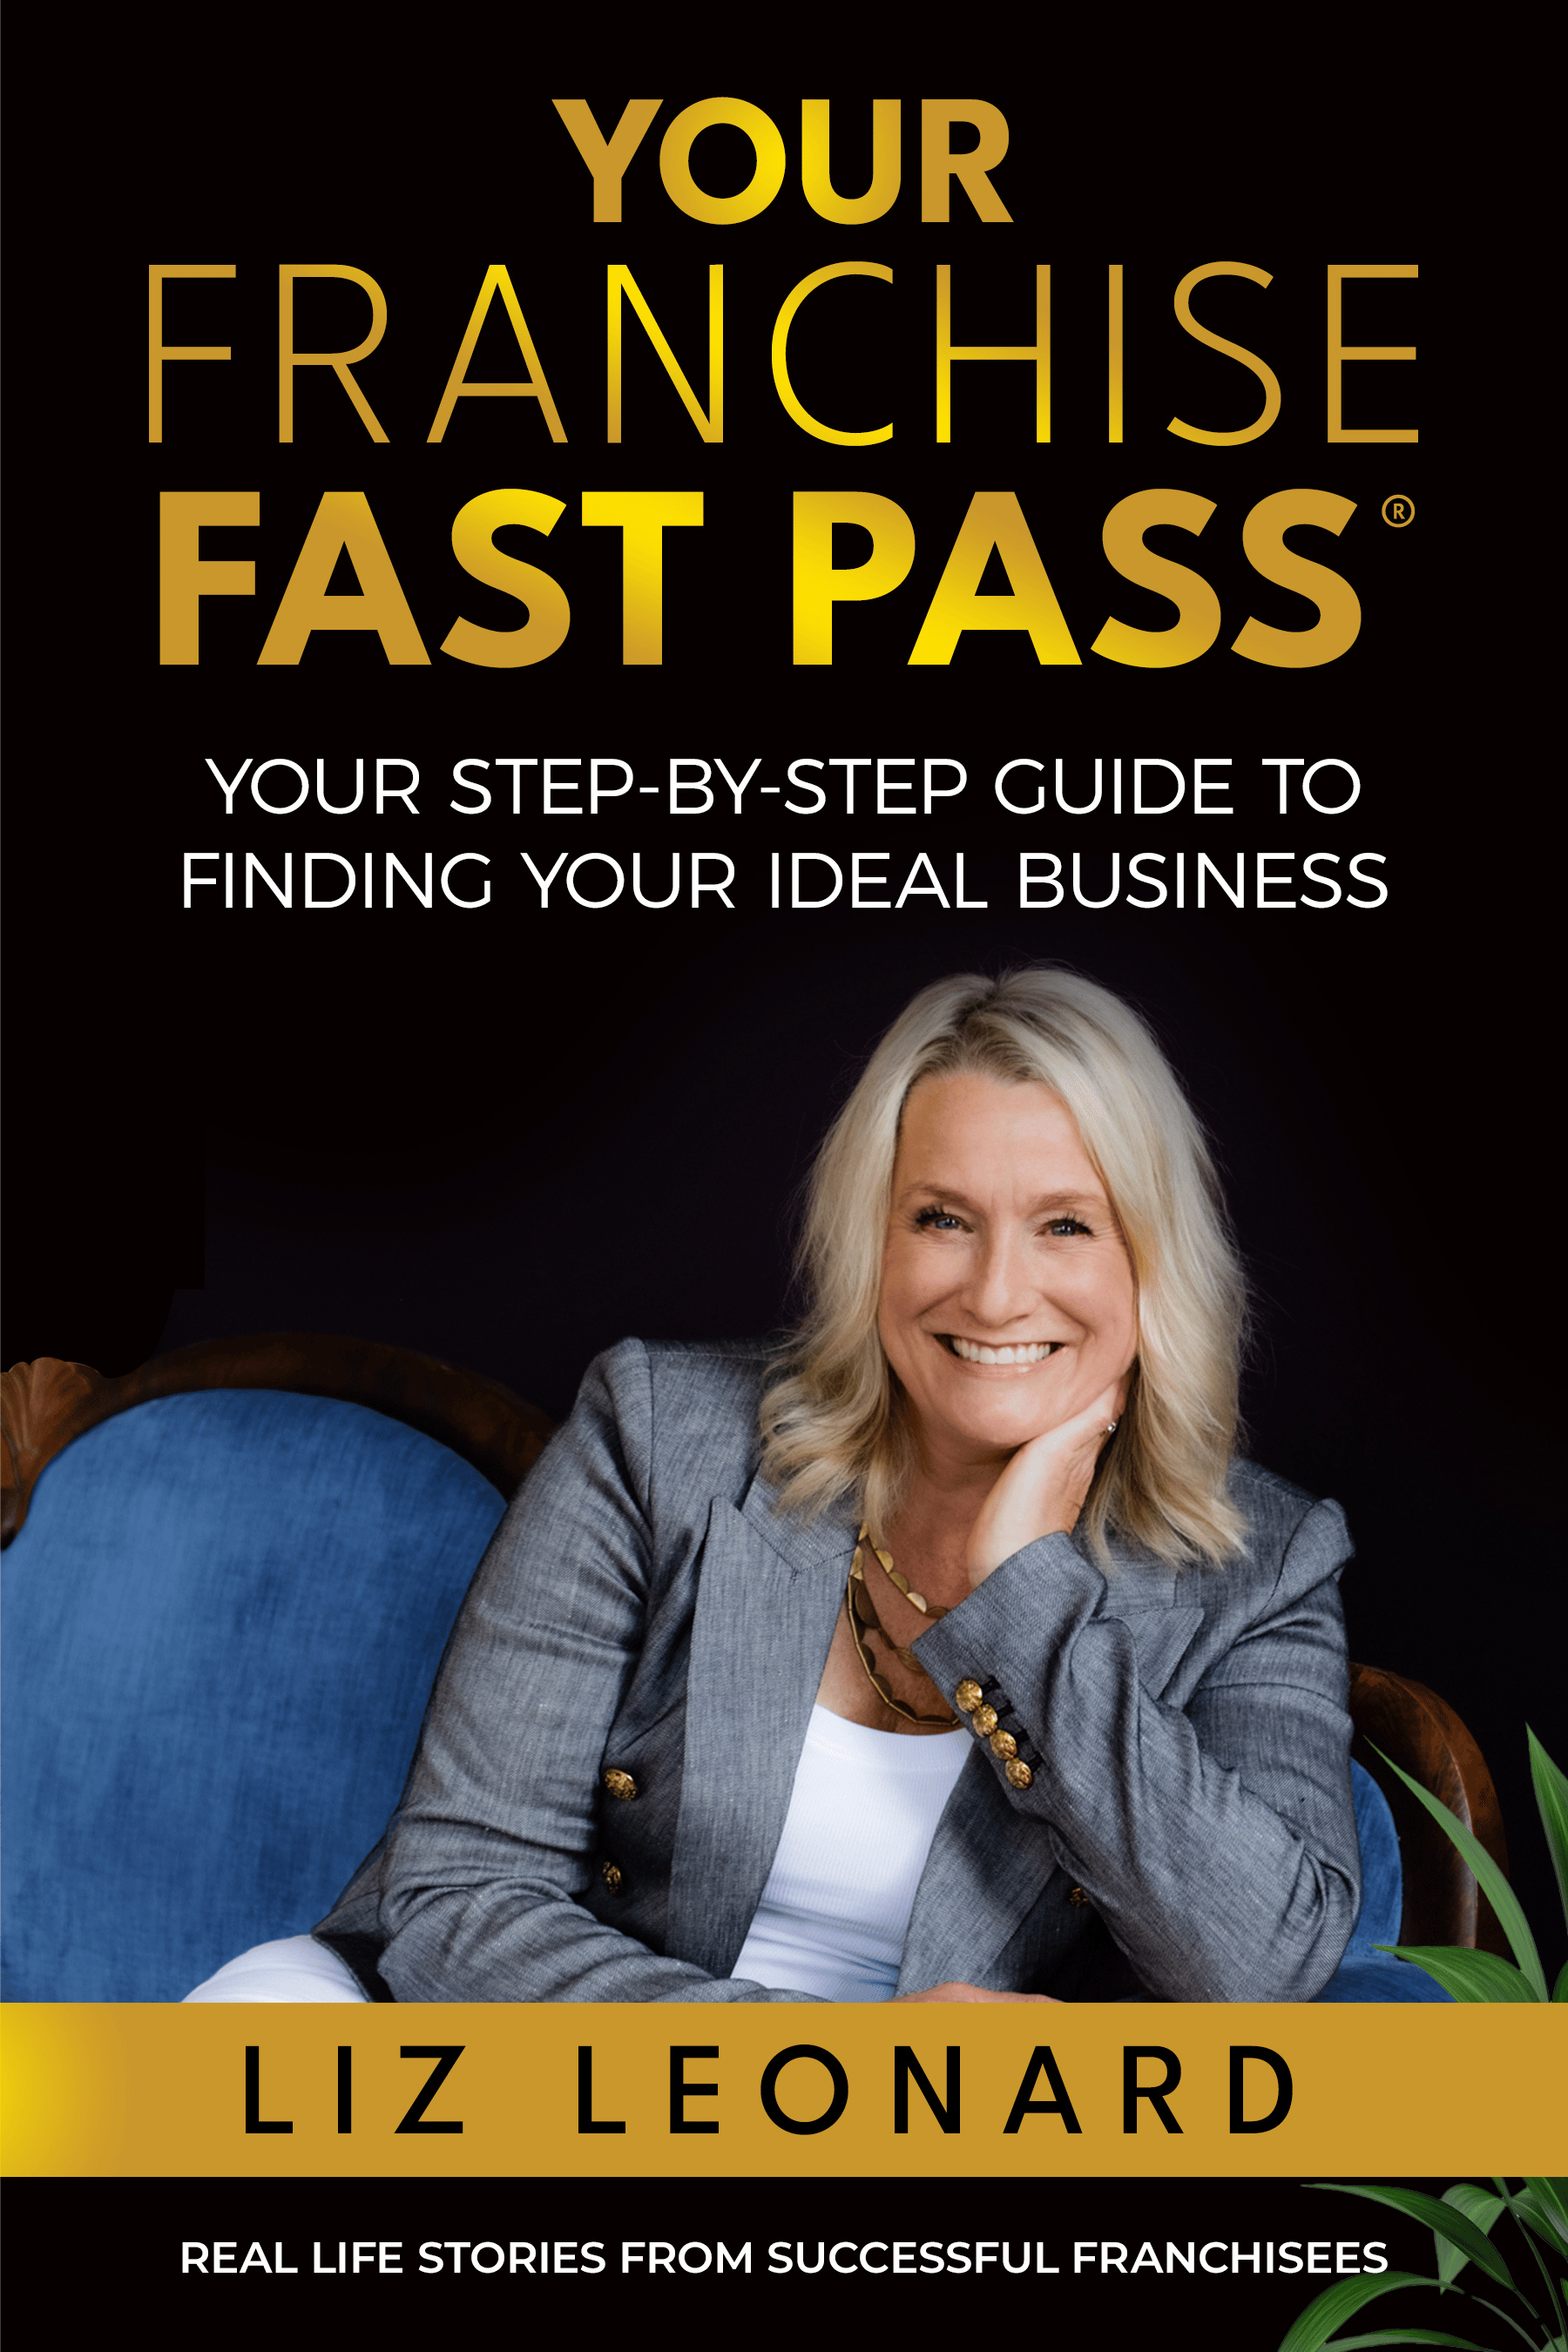 Your Franchise Fast Pass Gives Entrepreneurs An Inside Edge